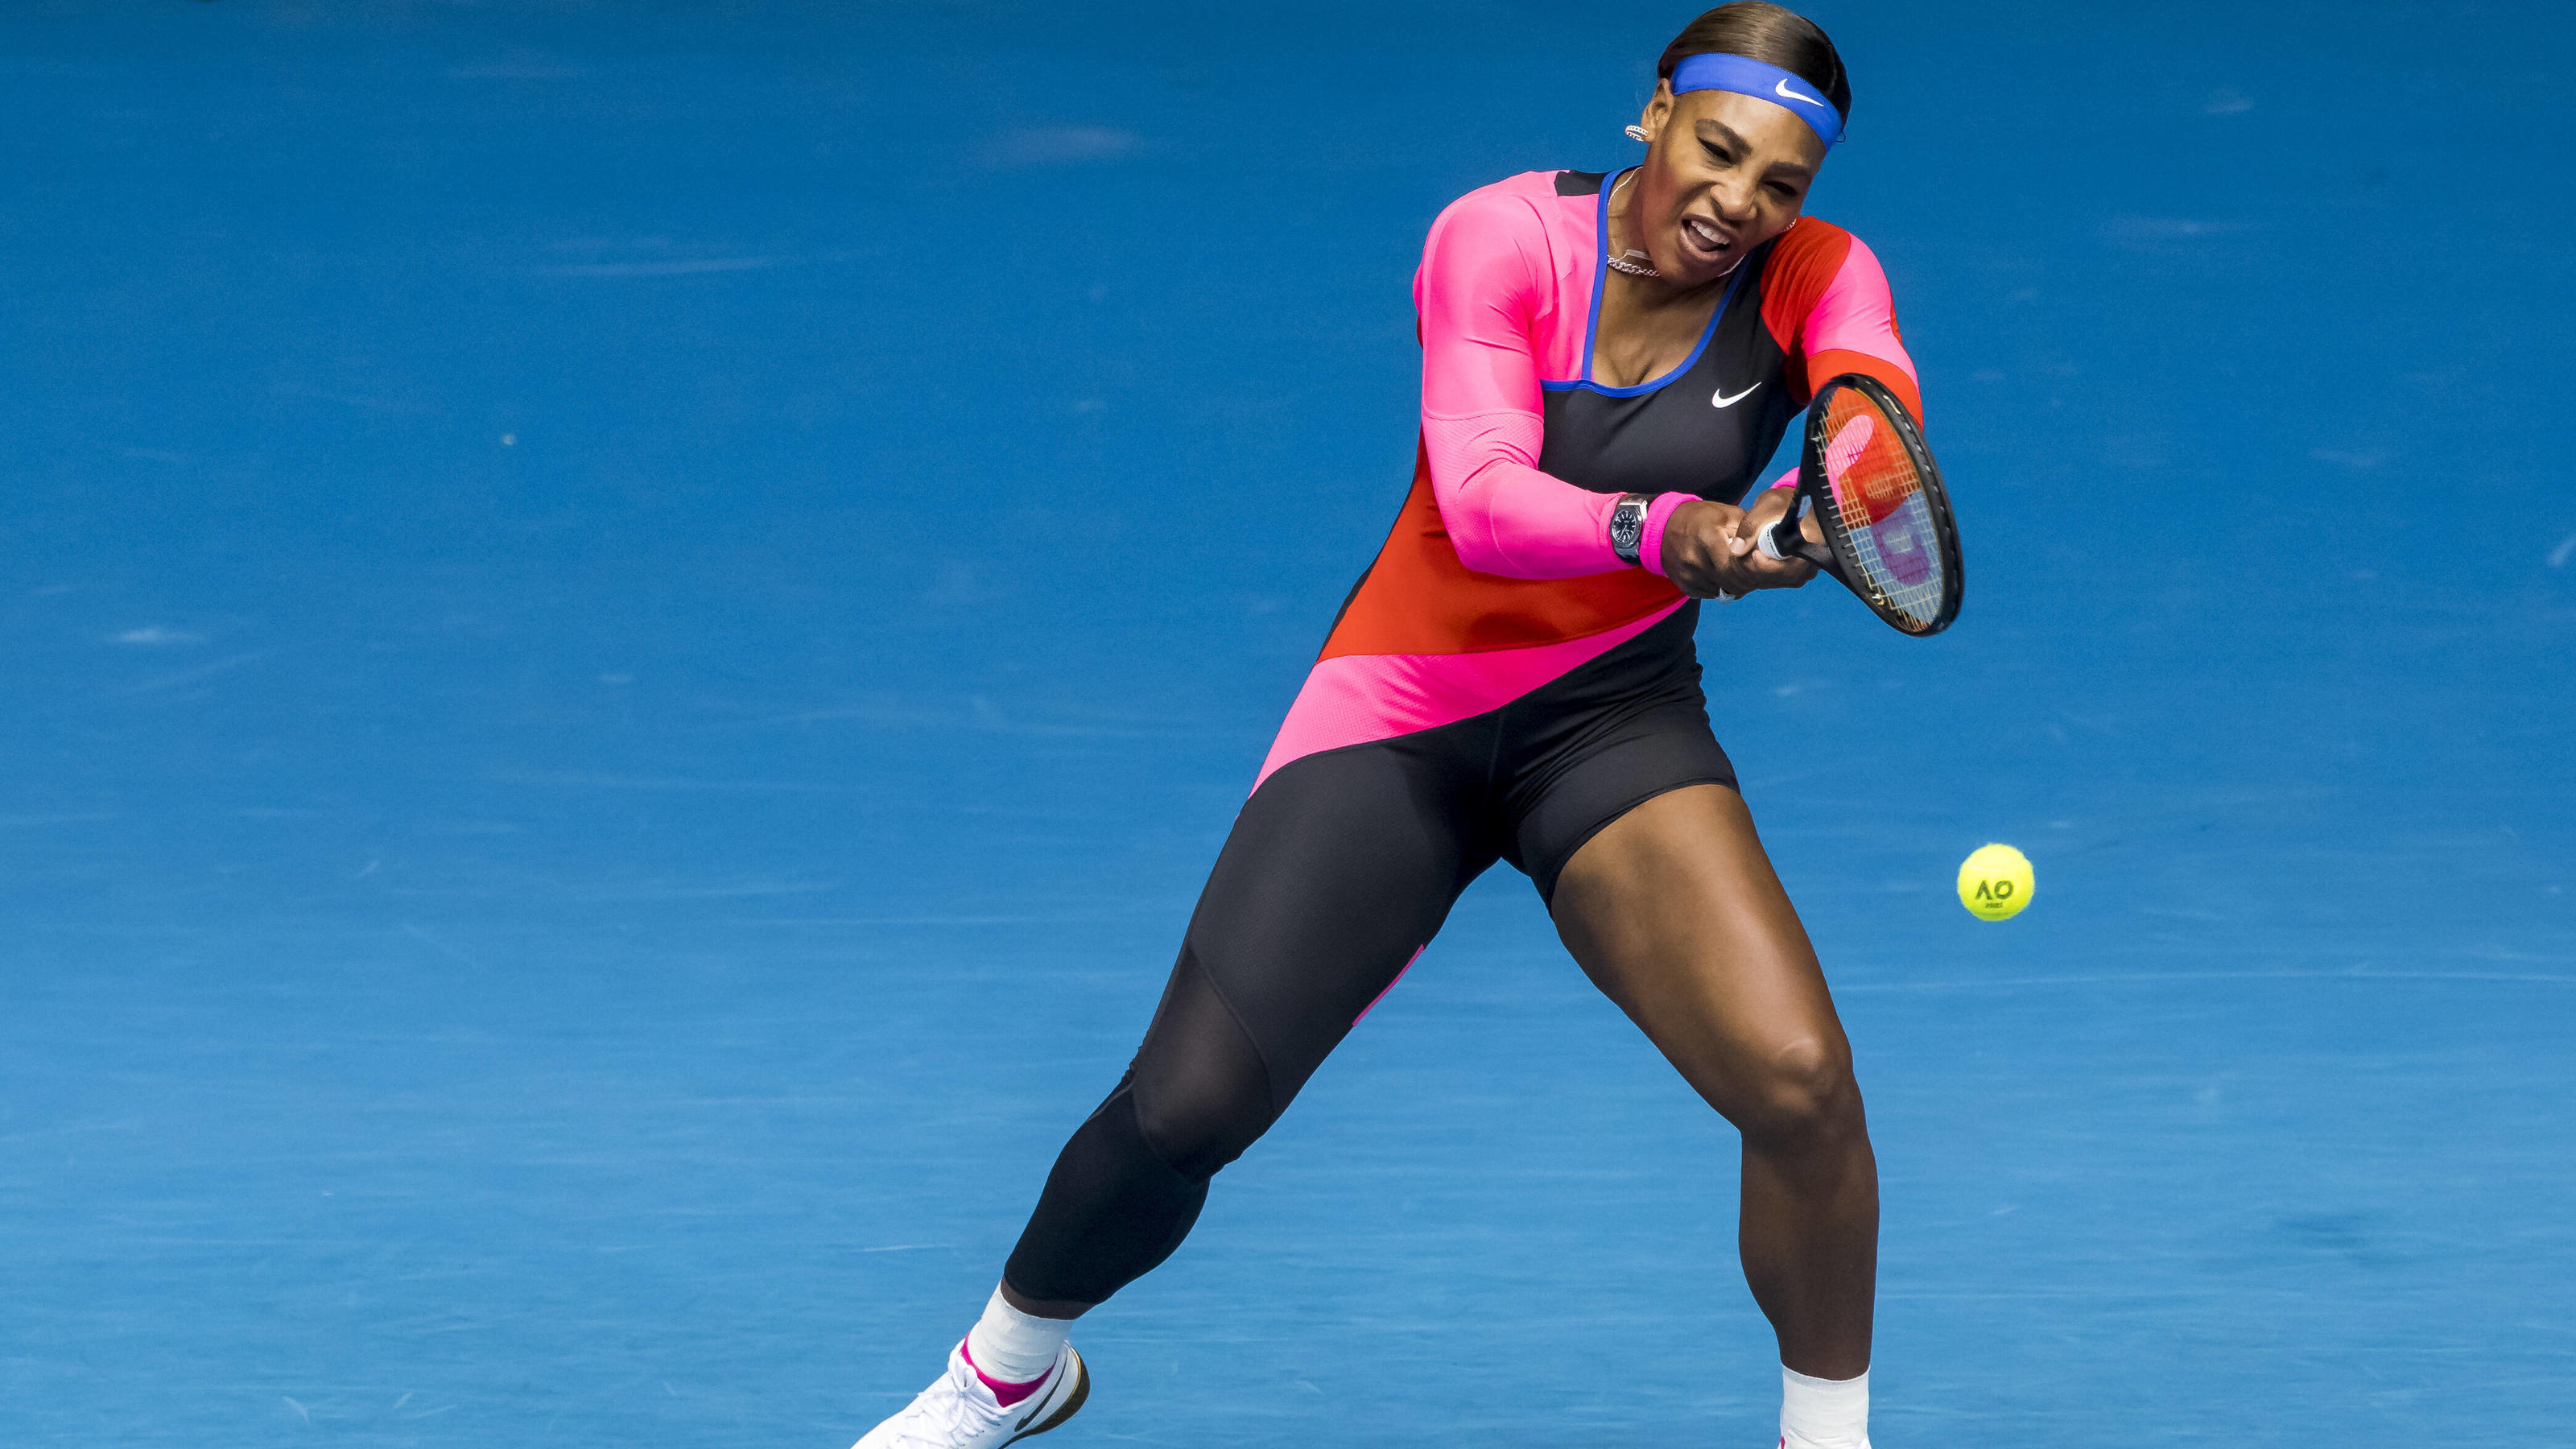  MELBOURNE, VIC - FEBRUARY 08: Serena Williams of the United States of America returns the ball during round 1 of the 2021 Australian Open on February 8 2020, at Melbourne Park in Melbourne, Australia. Photo by Jason Heidrich/Icon Sportswire TENNIS: 